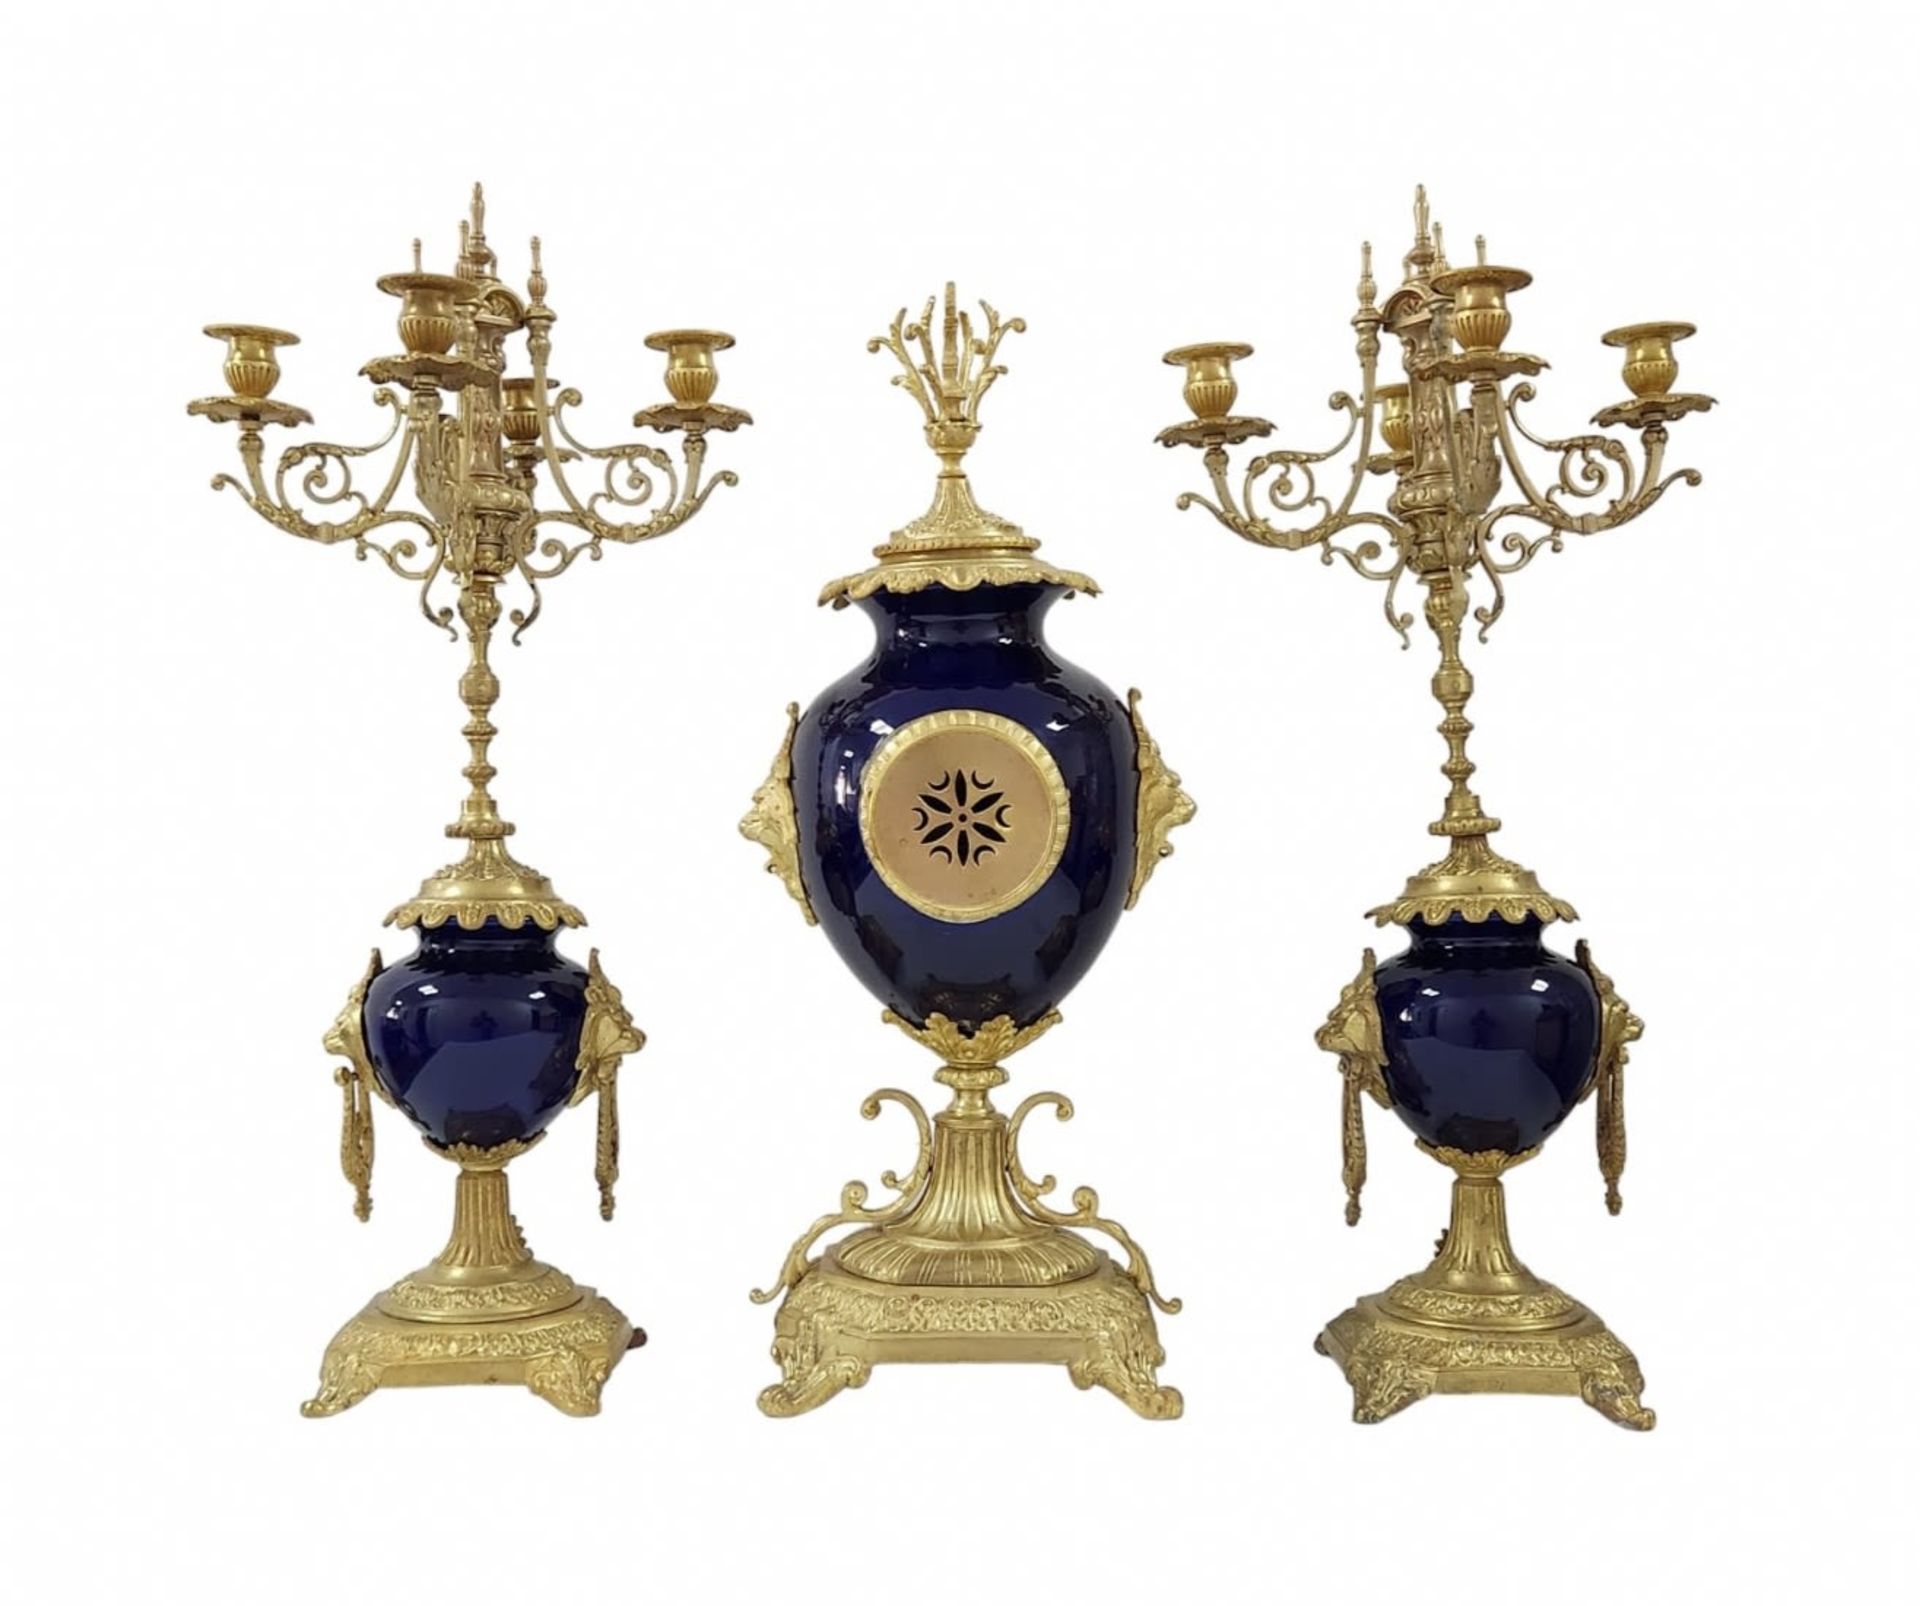 Antique French Garniture, impressively large and luxurious, includes a mantle clock and a pair of - Image 3 of 10